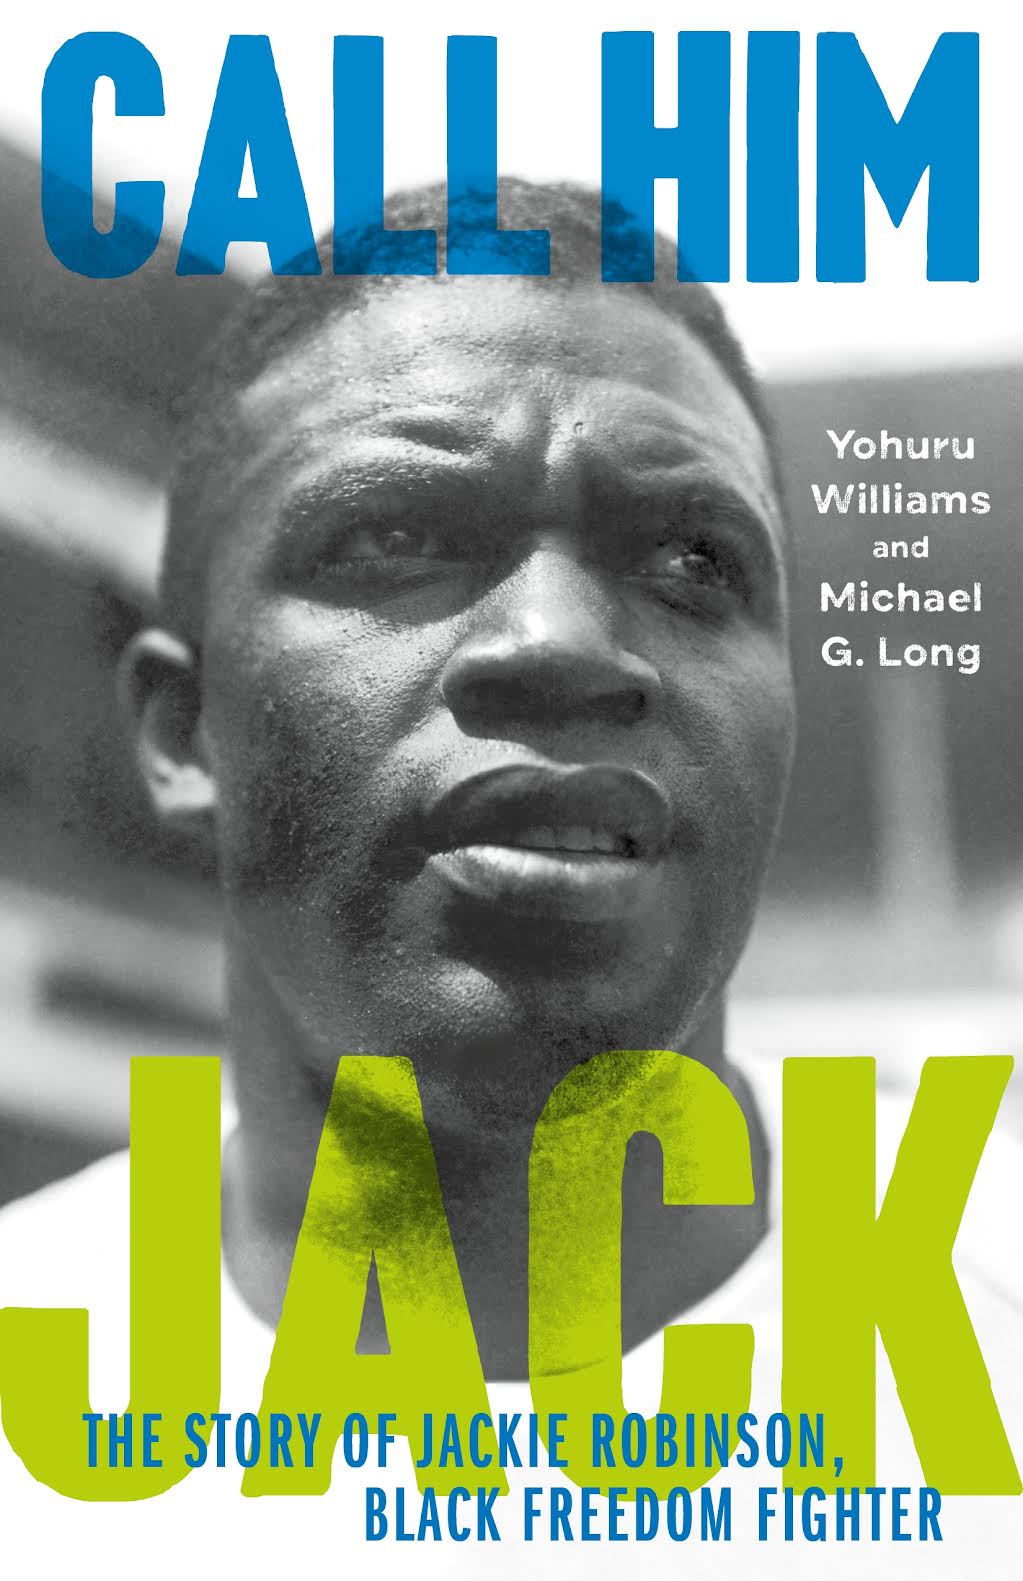 “Provocatively Nuanced”: The Humanizing of Jackie Robinson